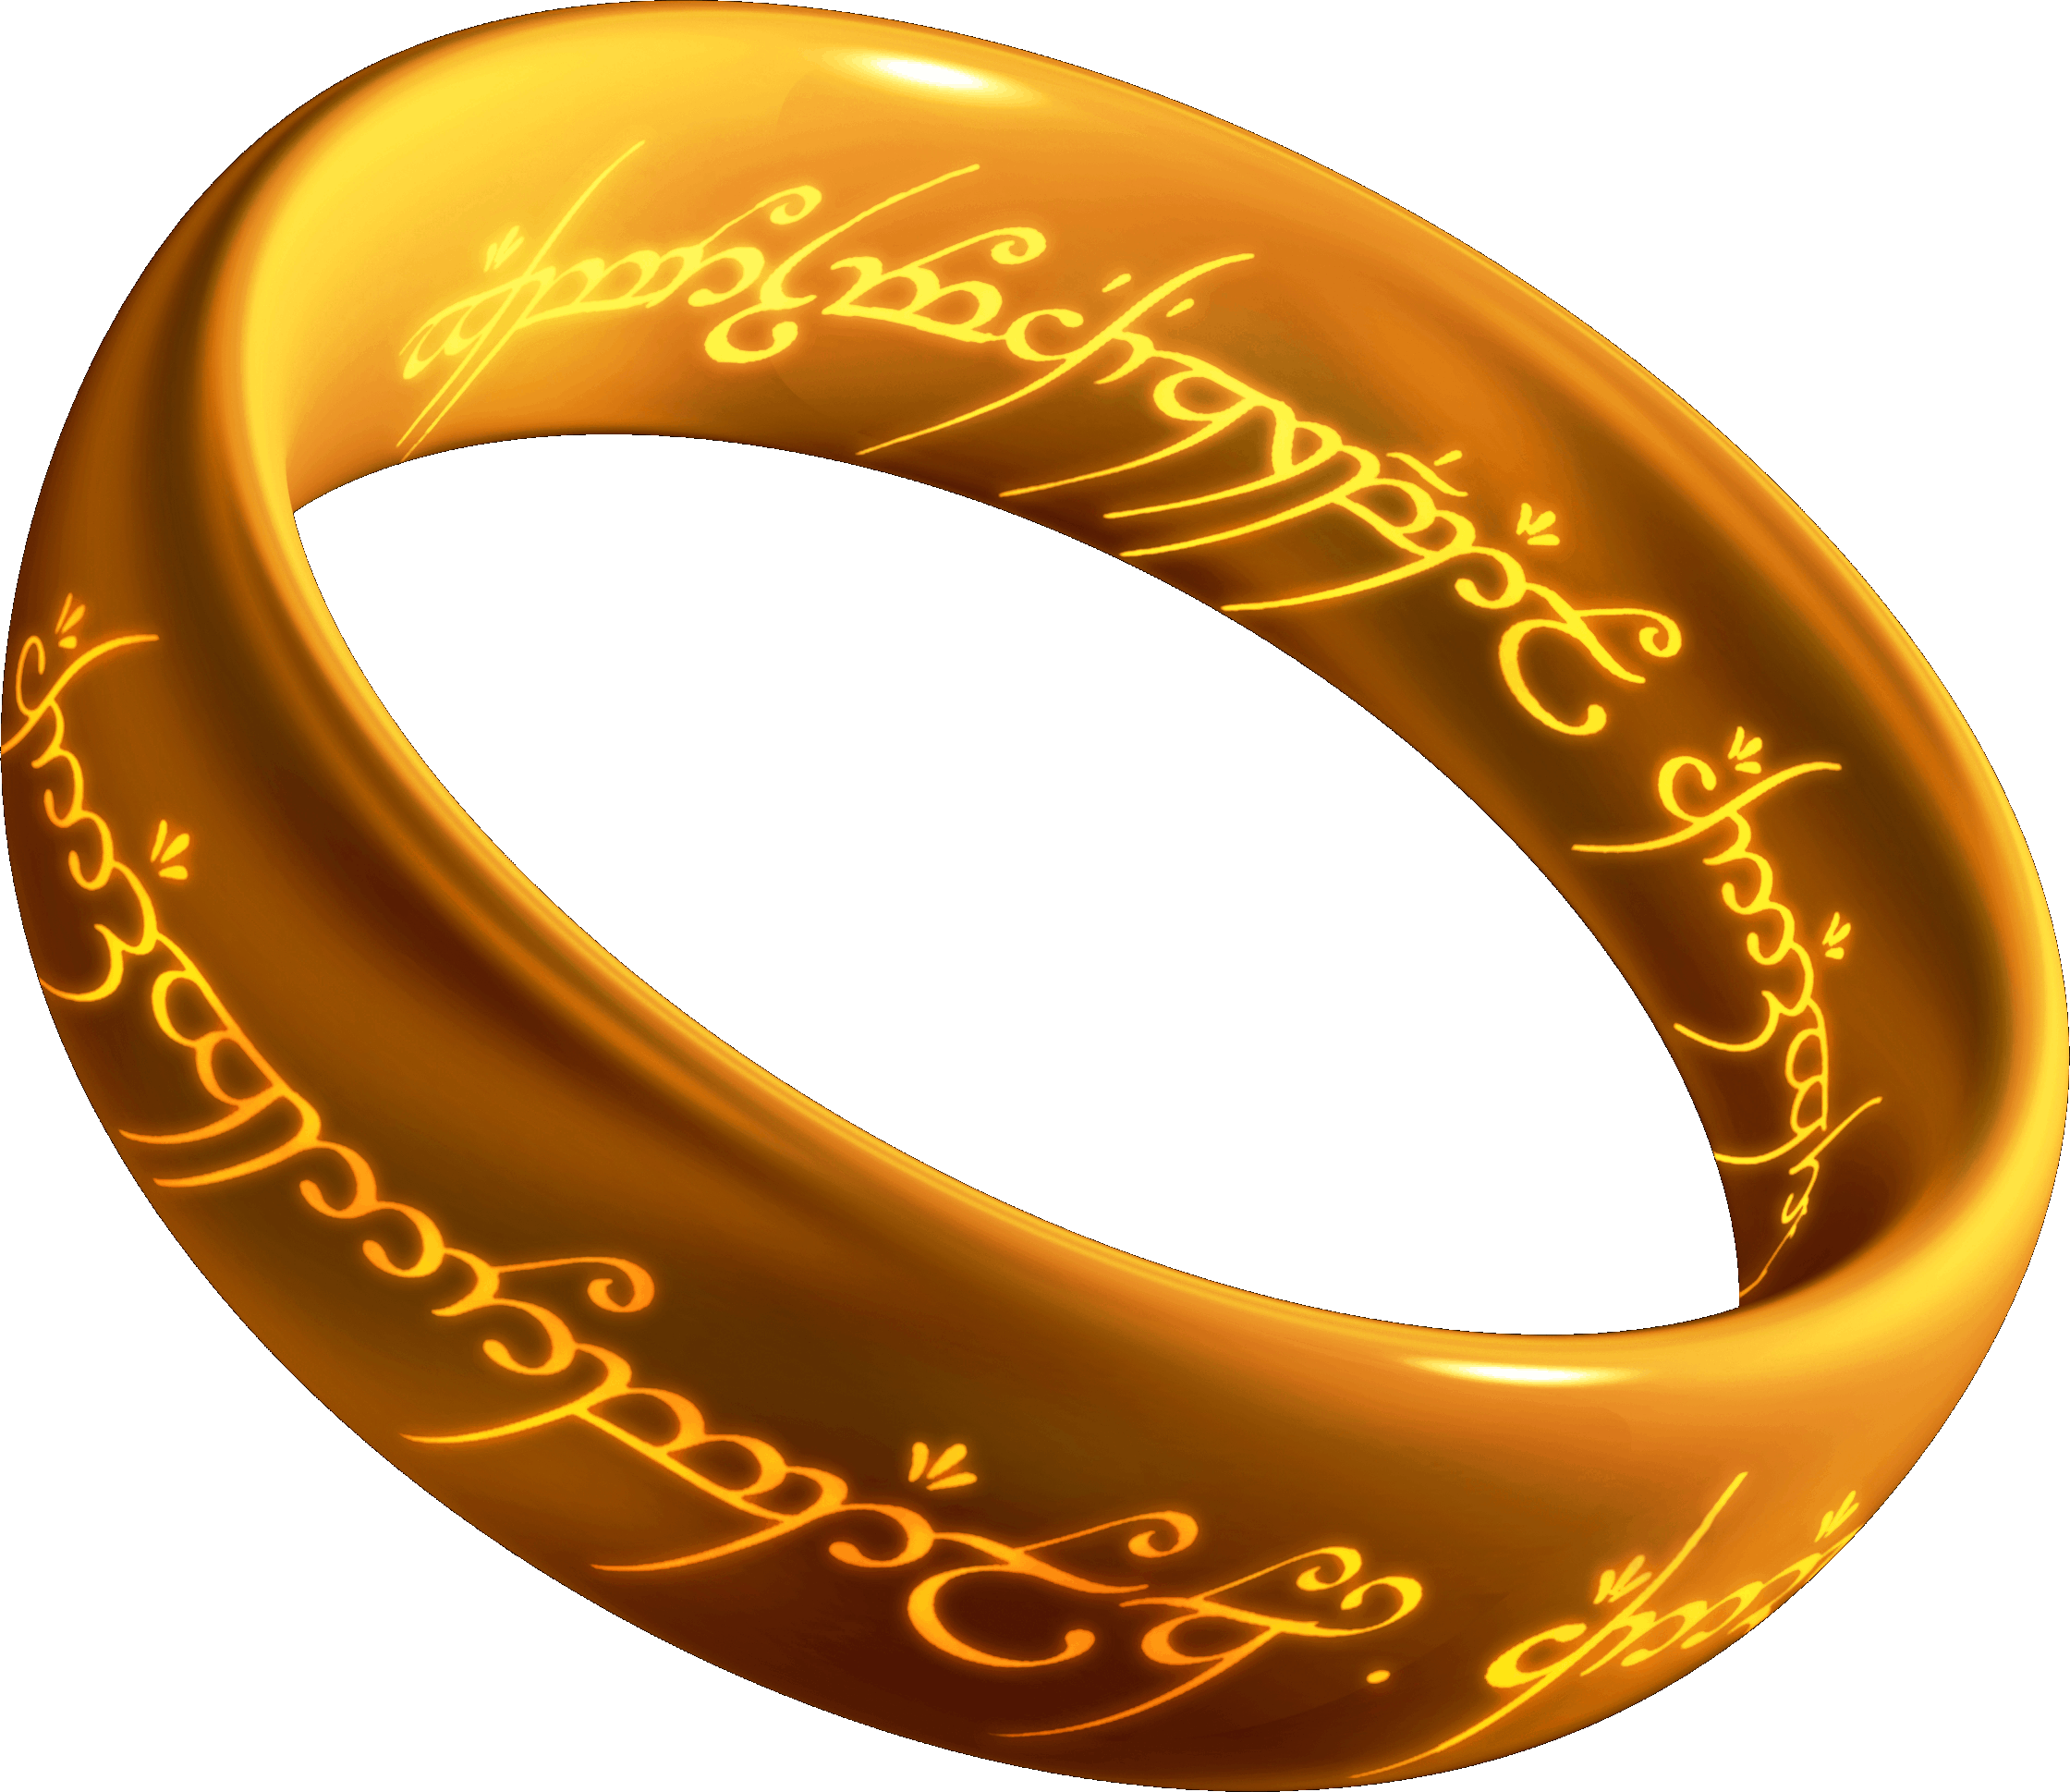 One Ring to rule them all, | One Ring to find them, One Ring… | Flickr